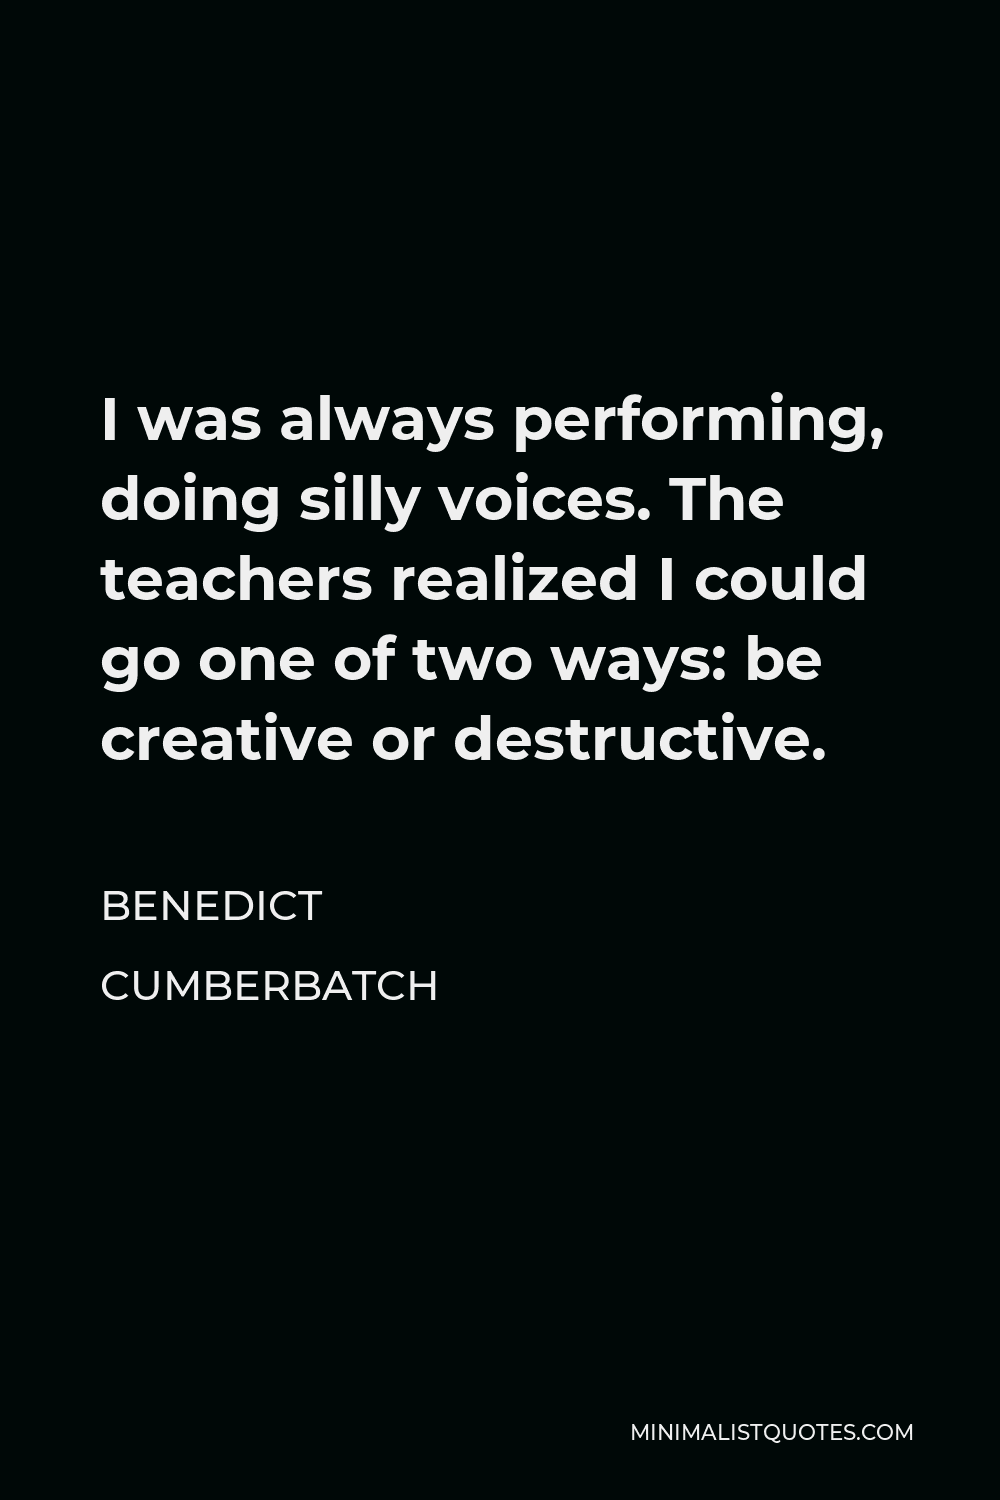 Benedict Cumberbatch Quote - I was always performing, doing silly voices. The teachers realized I could go one of two ways: be creative or destructive.